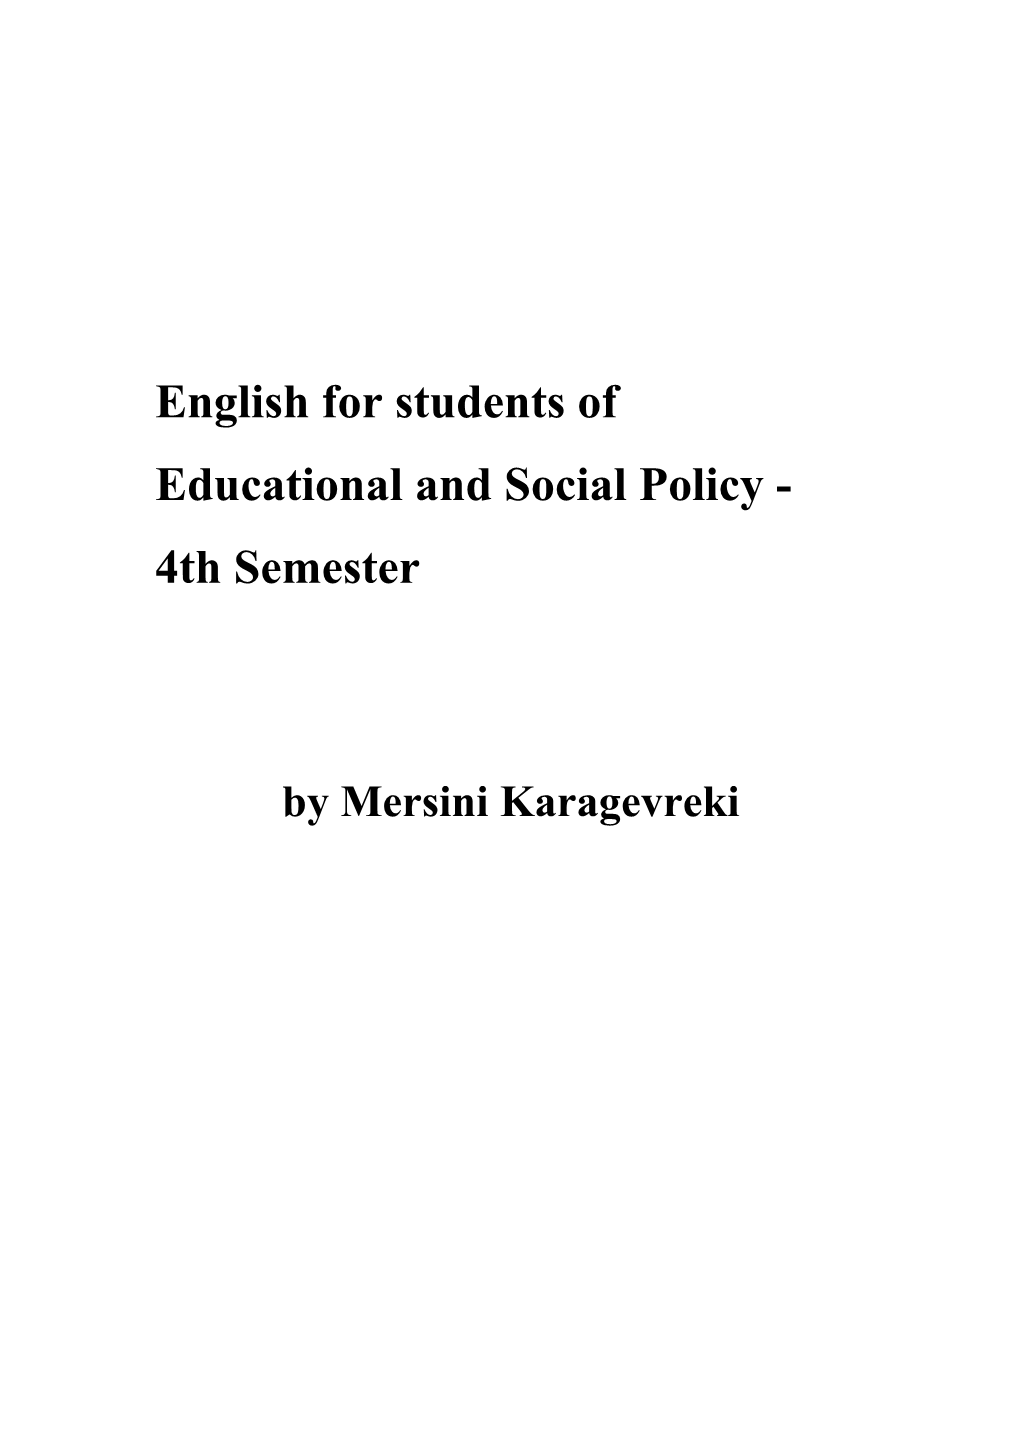 English for Students of Educational and Social Policy - 4Th Semester